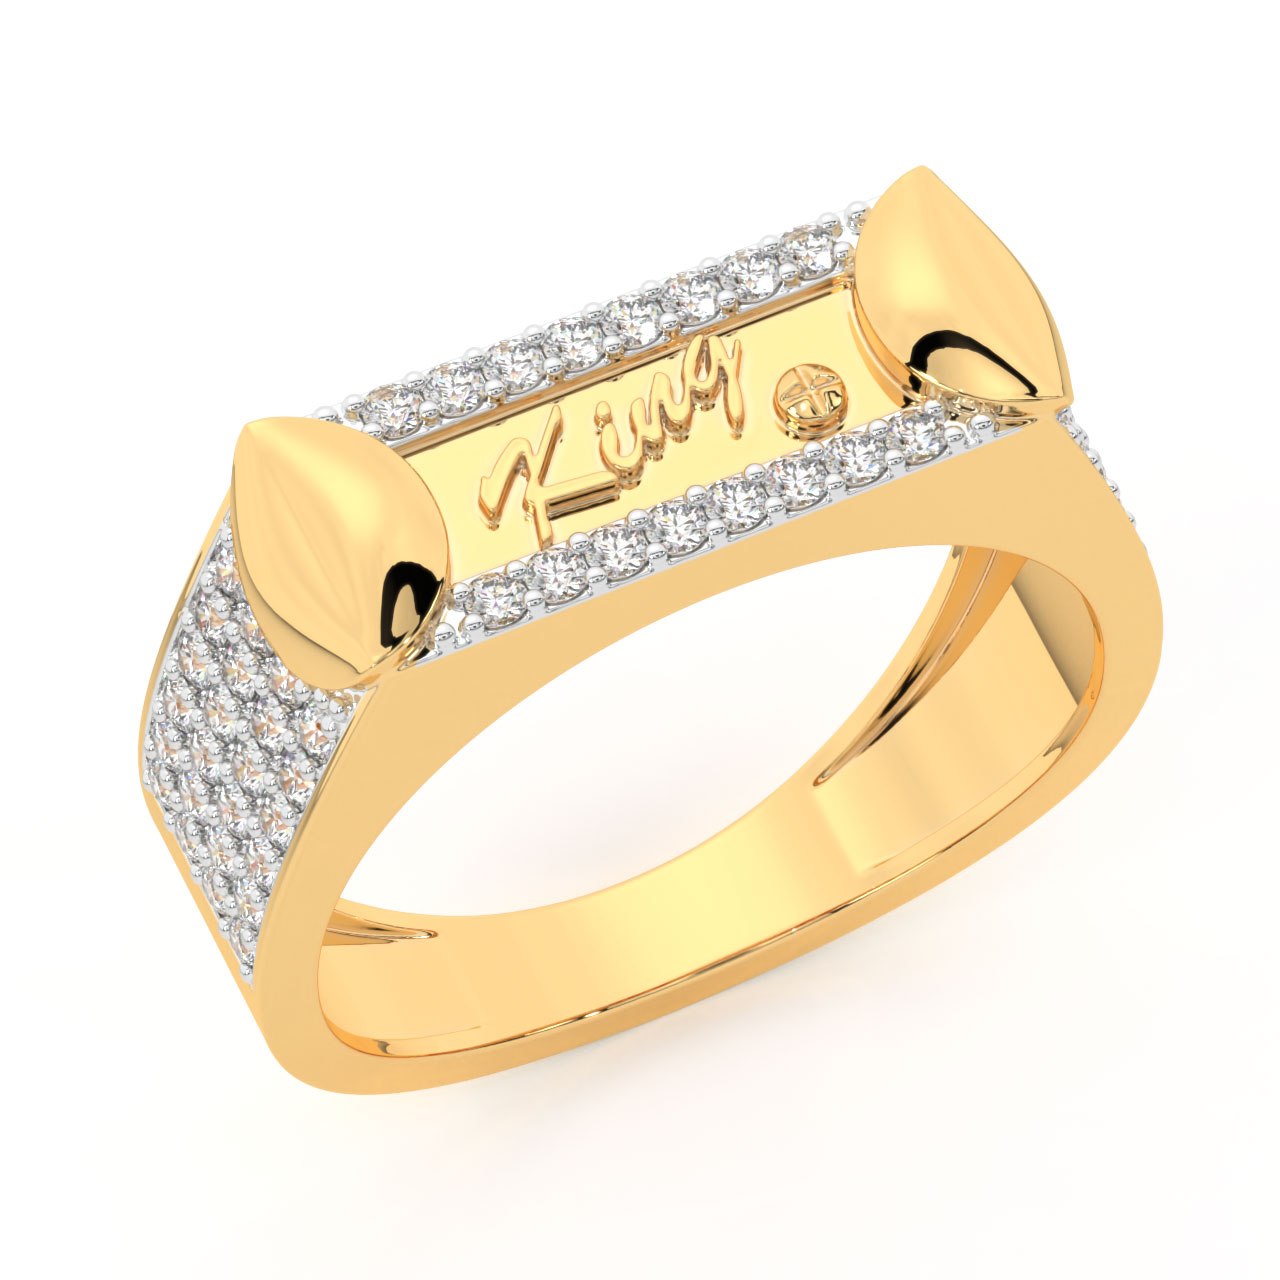 Amos - 14k Yellow Gold 1 Carat Round Wide Band Natural Diamond Engagement  Ring @ $4650 | Gabriel & Co.